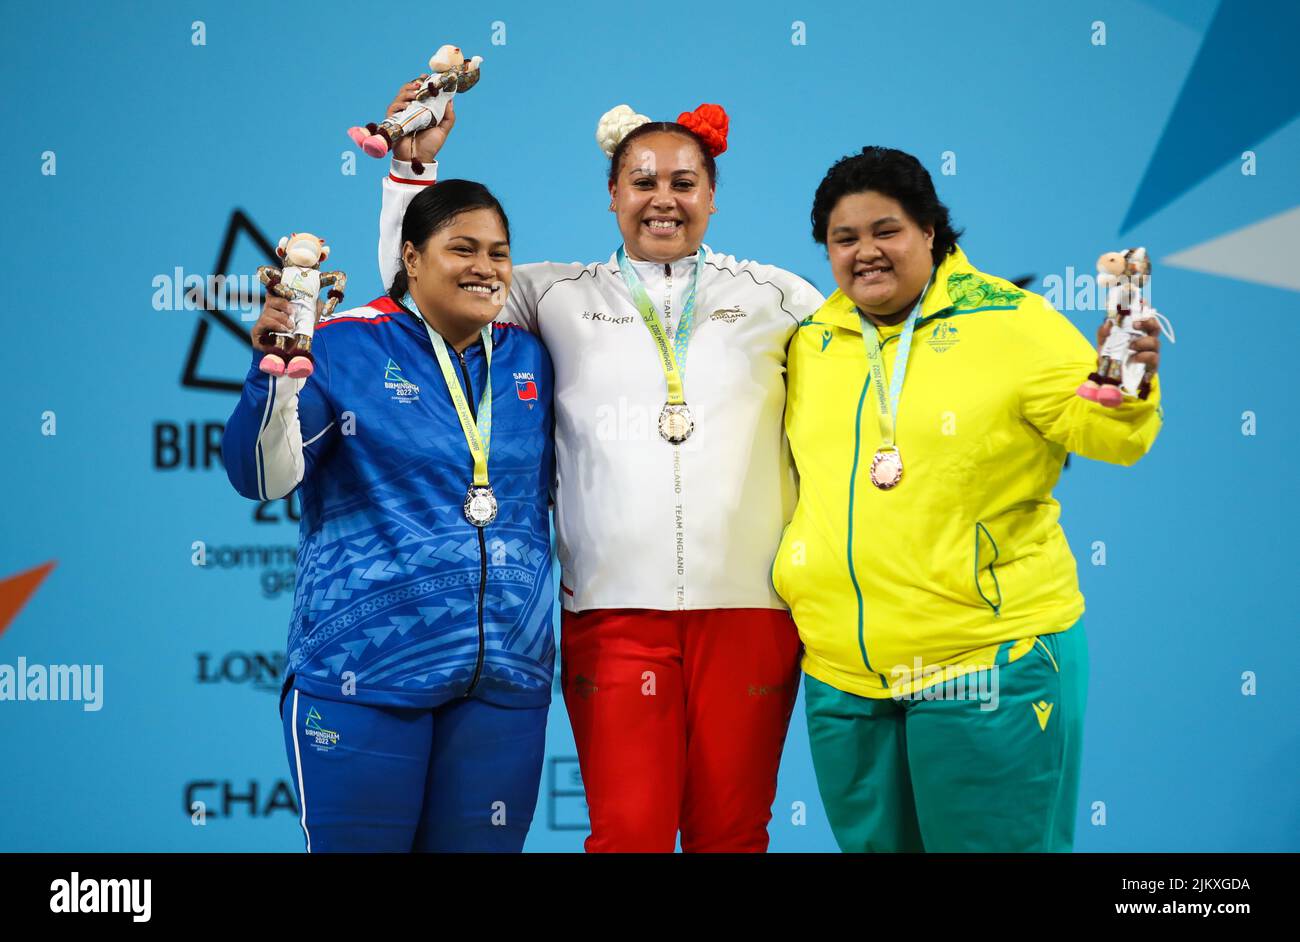 Samoa’s Feagaiga Stowers, England's Emily Campbell and Charisma Amoe Tarrant celebrate with their medals following the Women’s 89kg+ Final at The NEC on day six of the 2022 Commonwealth Games in Birmingham. Picture date: Wednesday August 3, 2022. Stock Photo